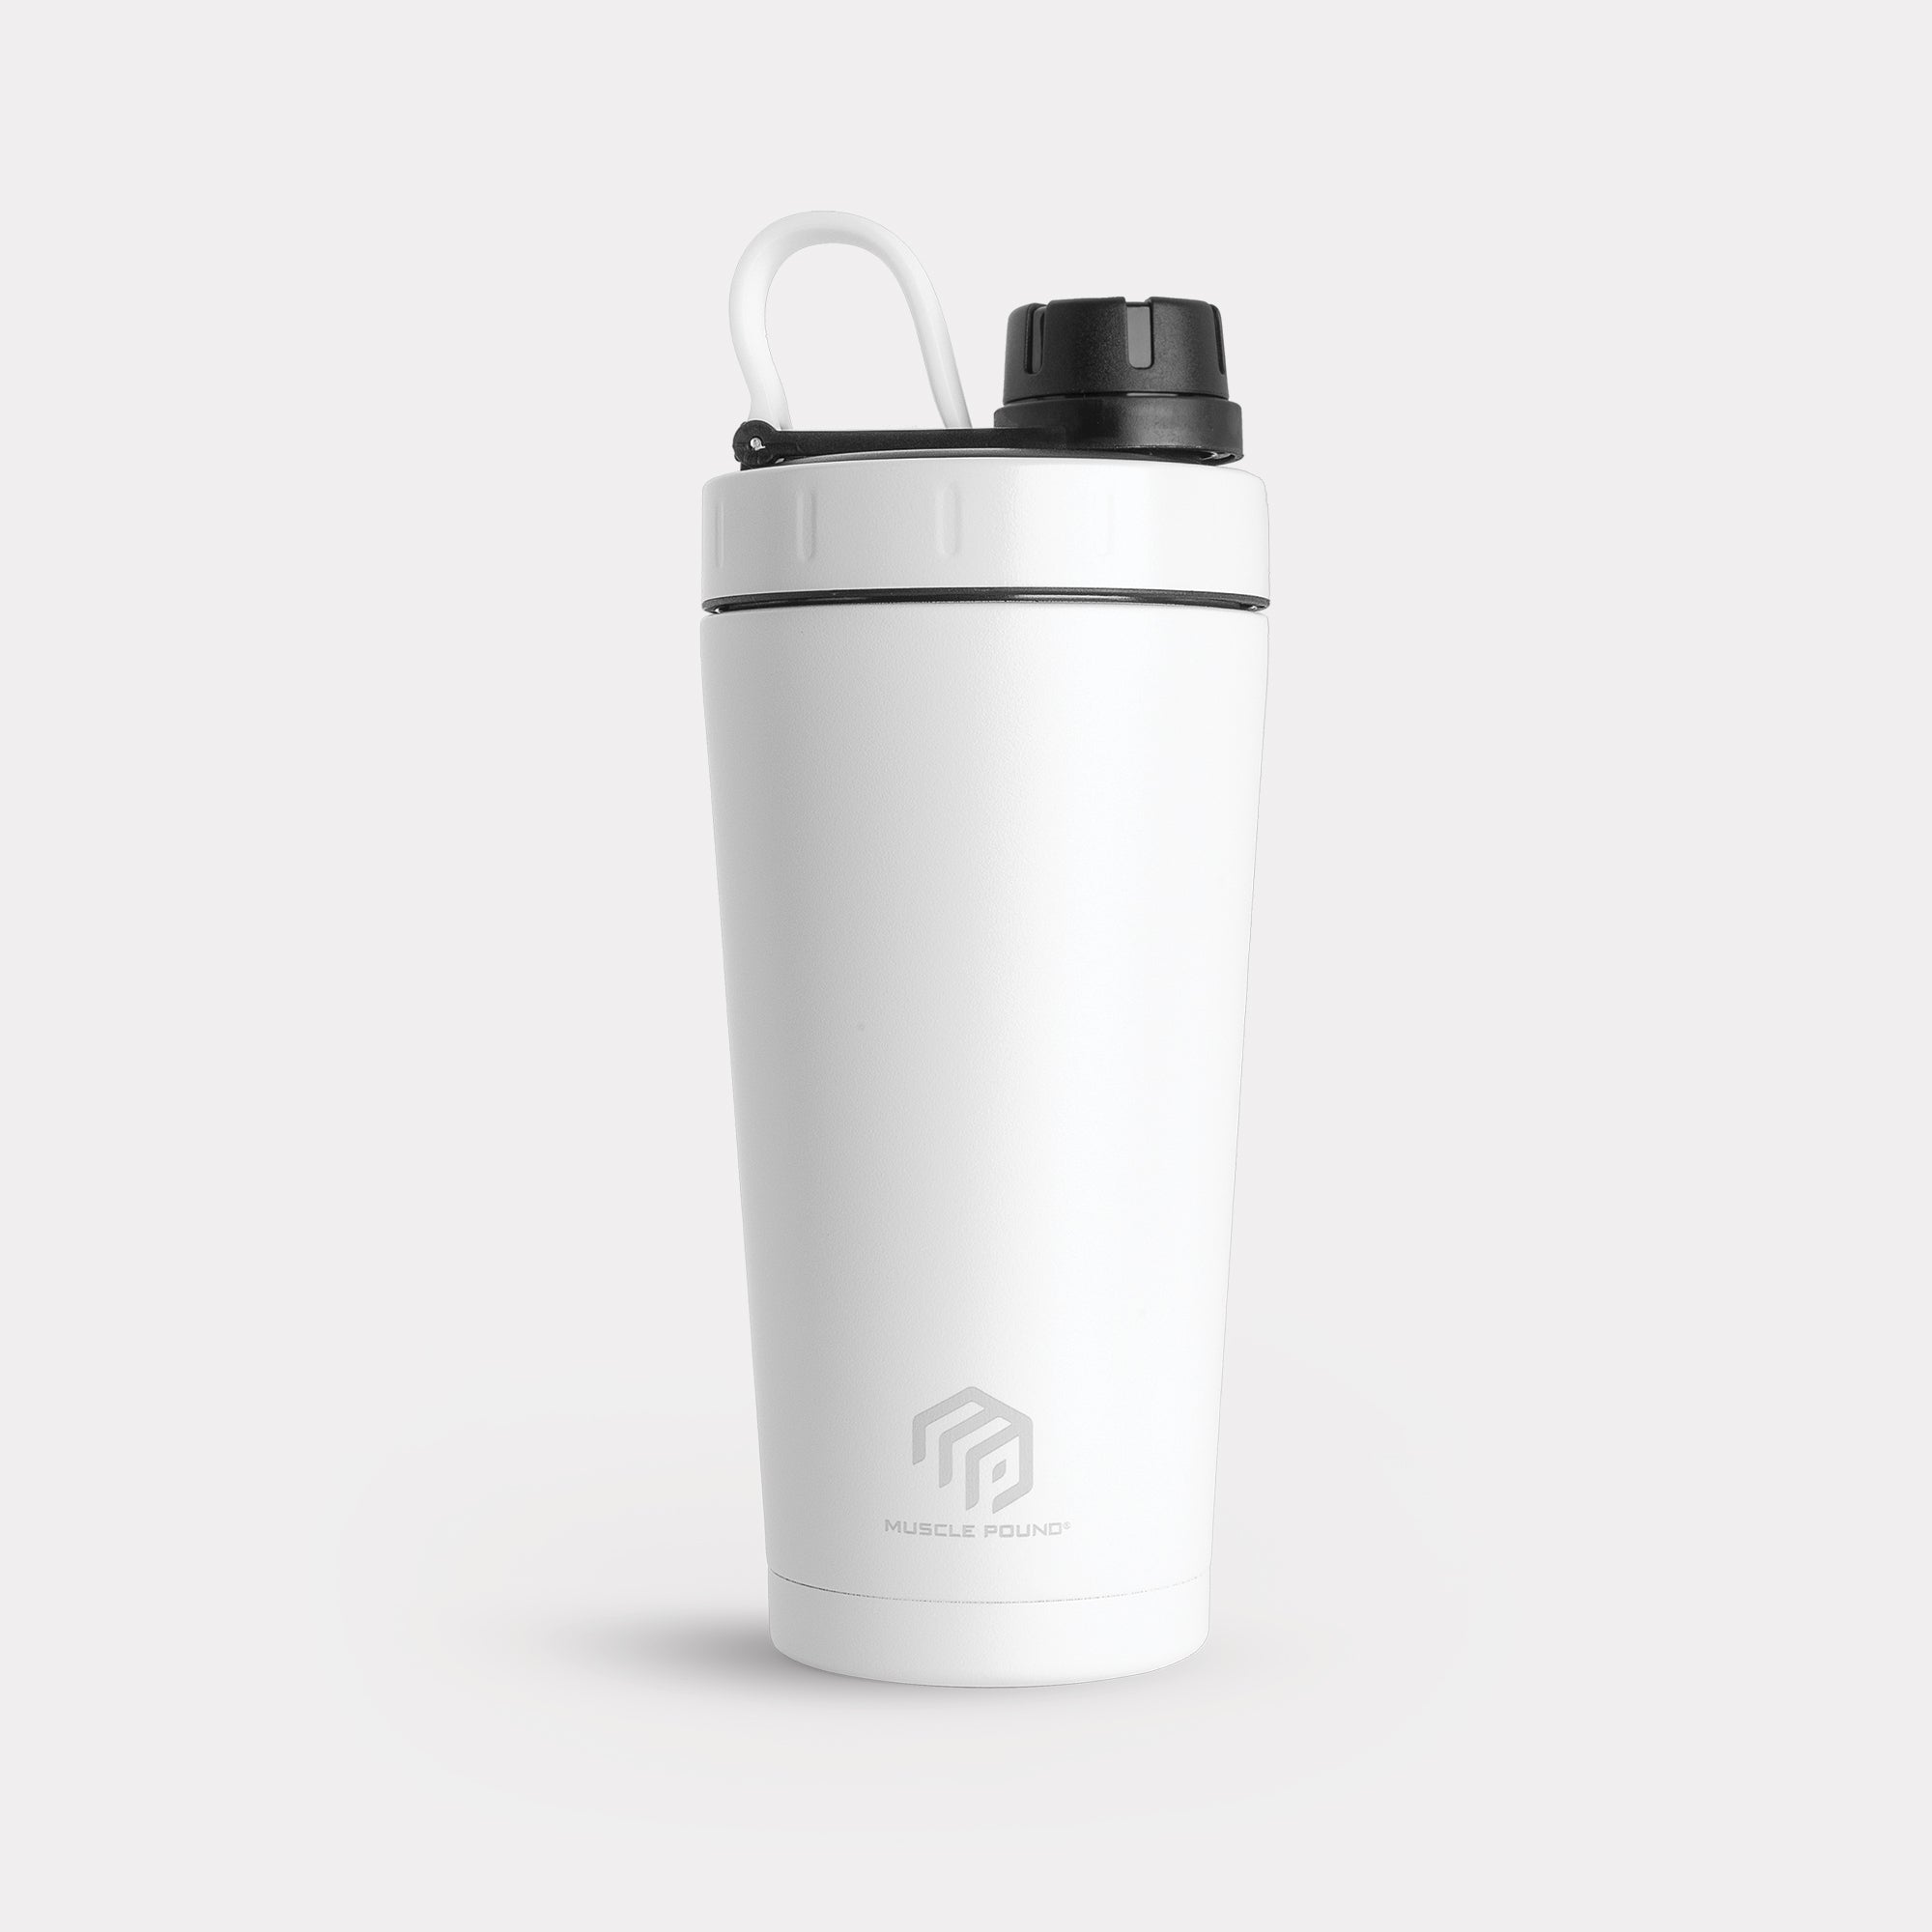 Enjoy a delicious protein shake in our white insulated shaker bottle.